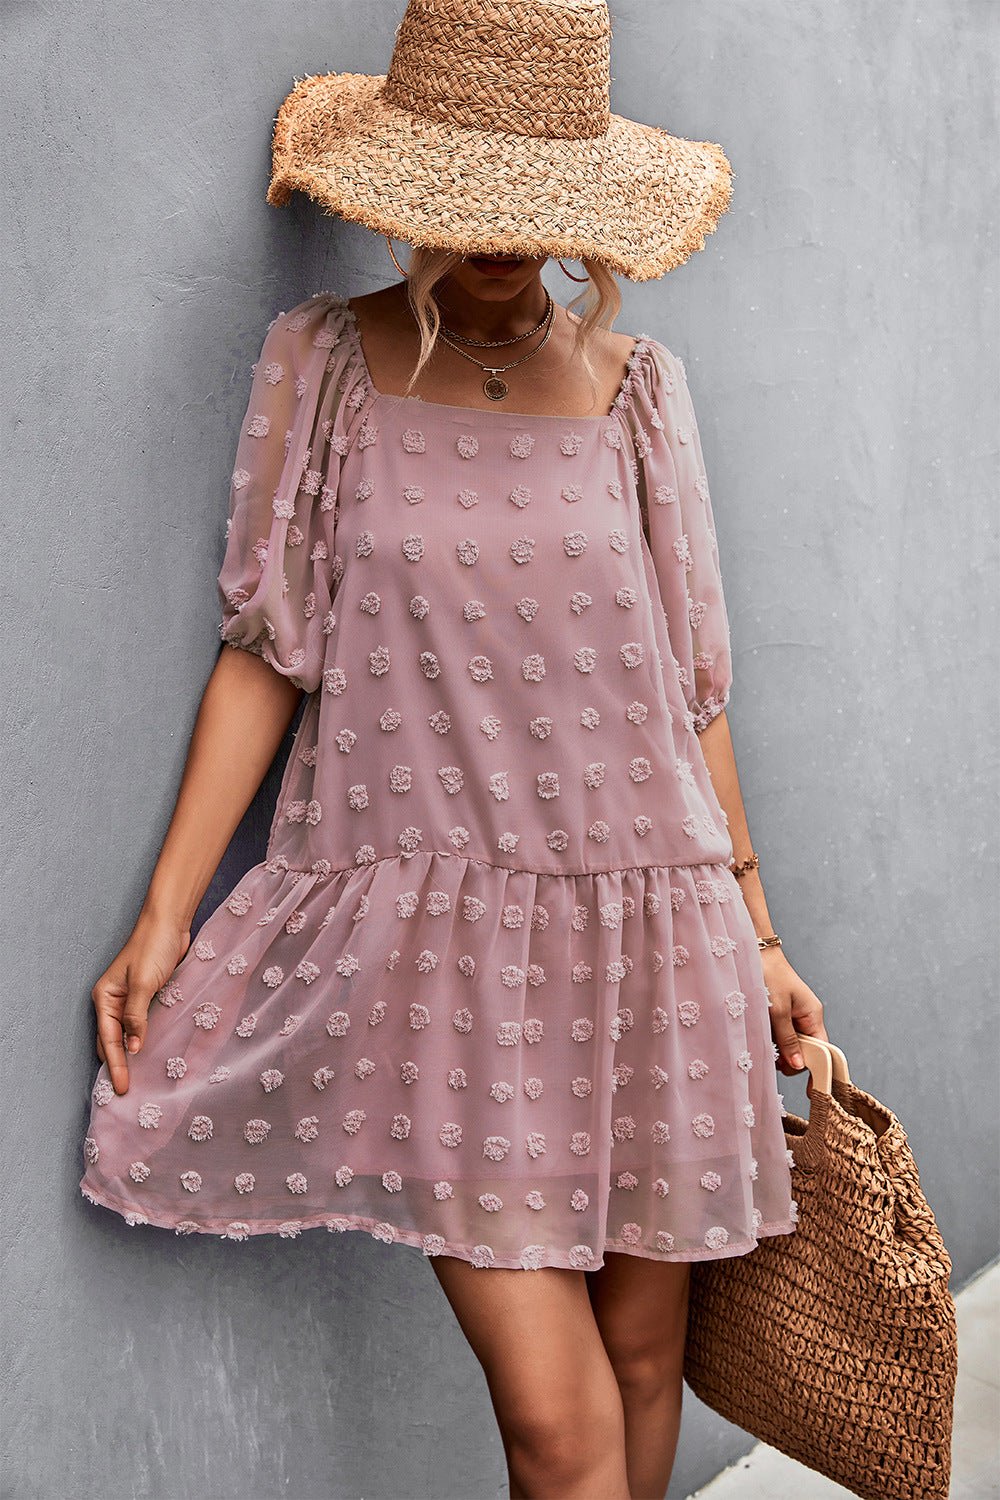 Can’t Help It Lace Mini Dress - pink mini lace dress with Swiss dot fabric, square neck, puff sleeve #Firefly Lane Boutique1